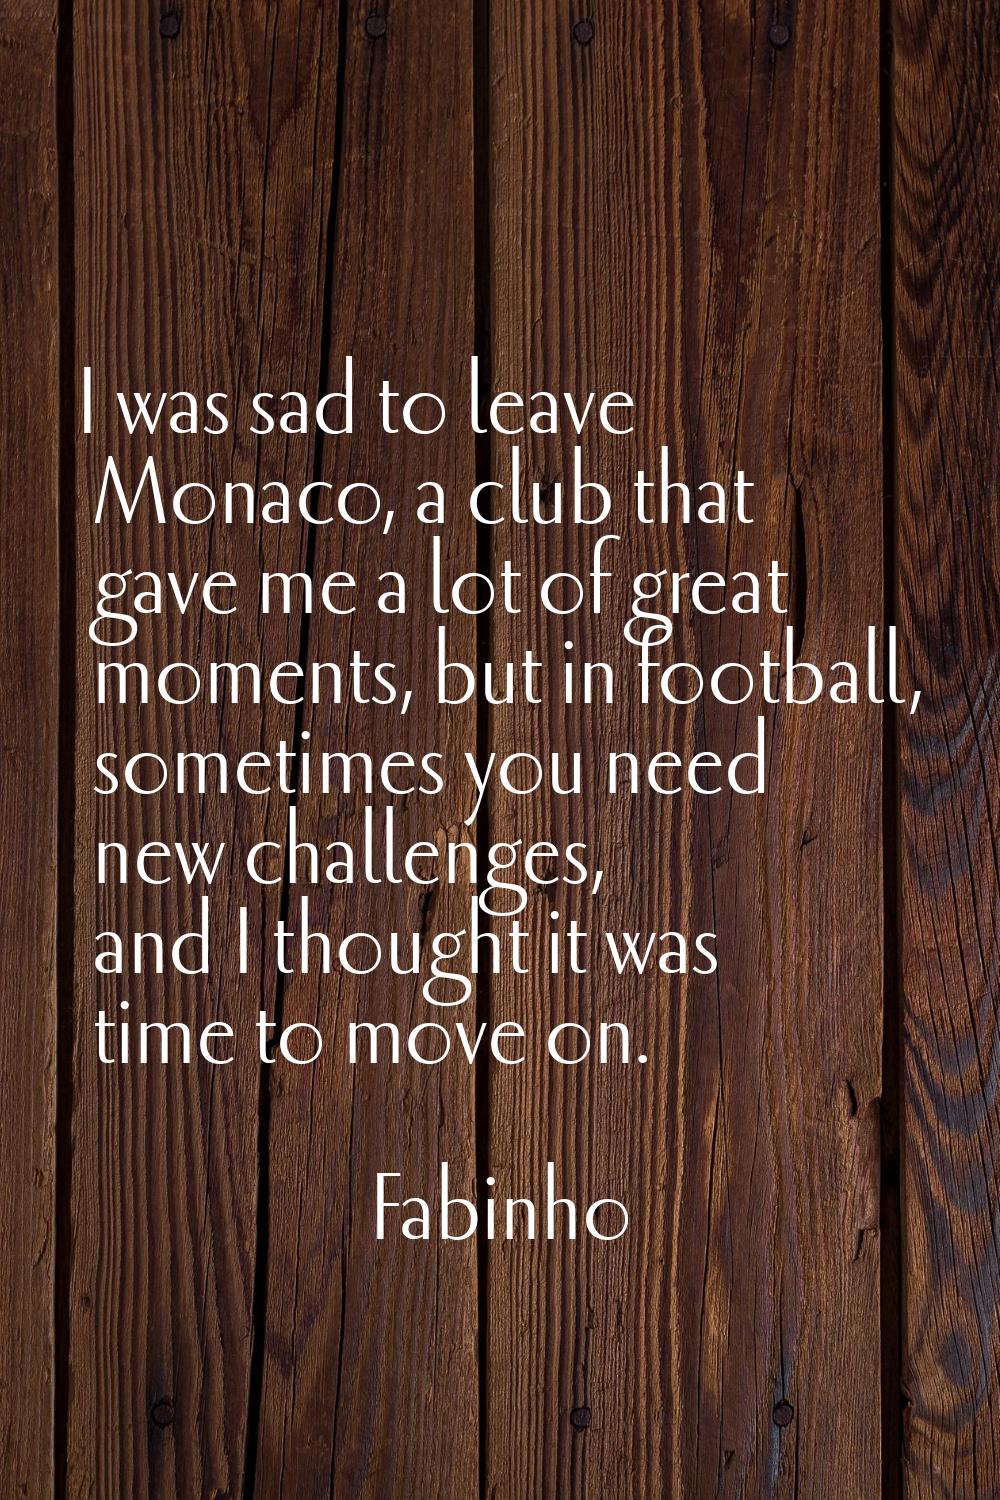 I was sad to leave Monaco, a club that gave me a lot of great moments, but in football, sometimes y